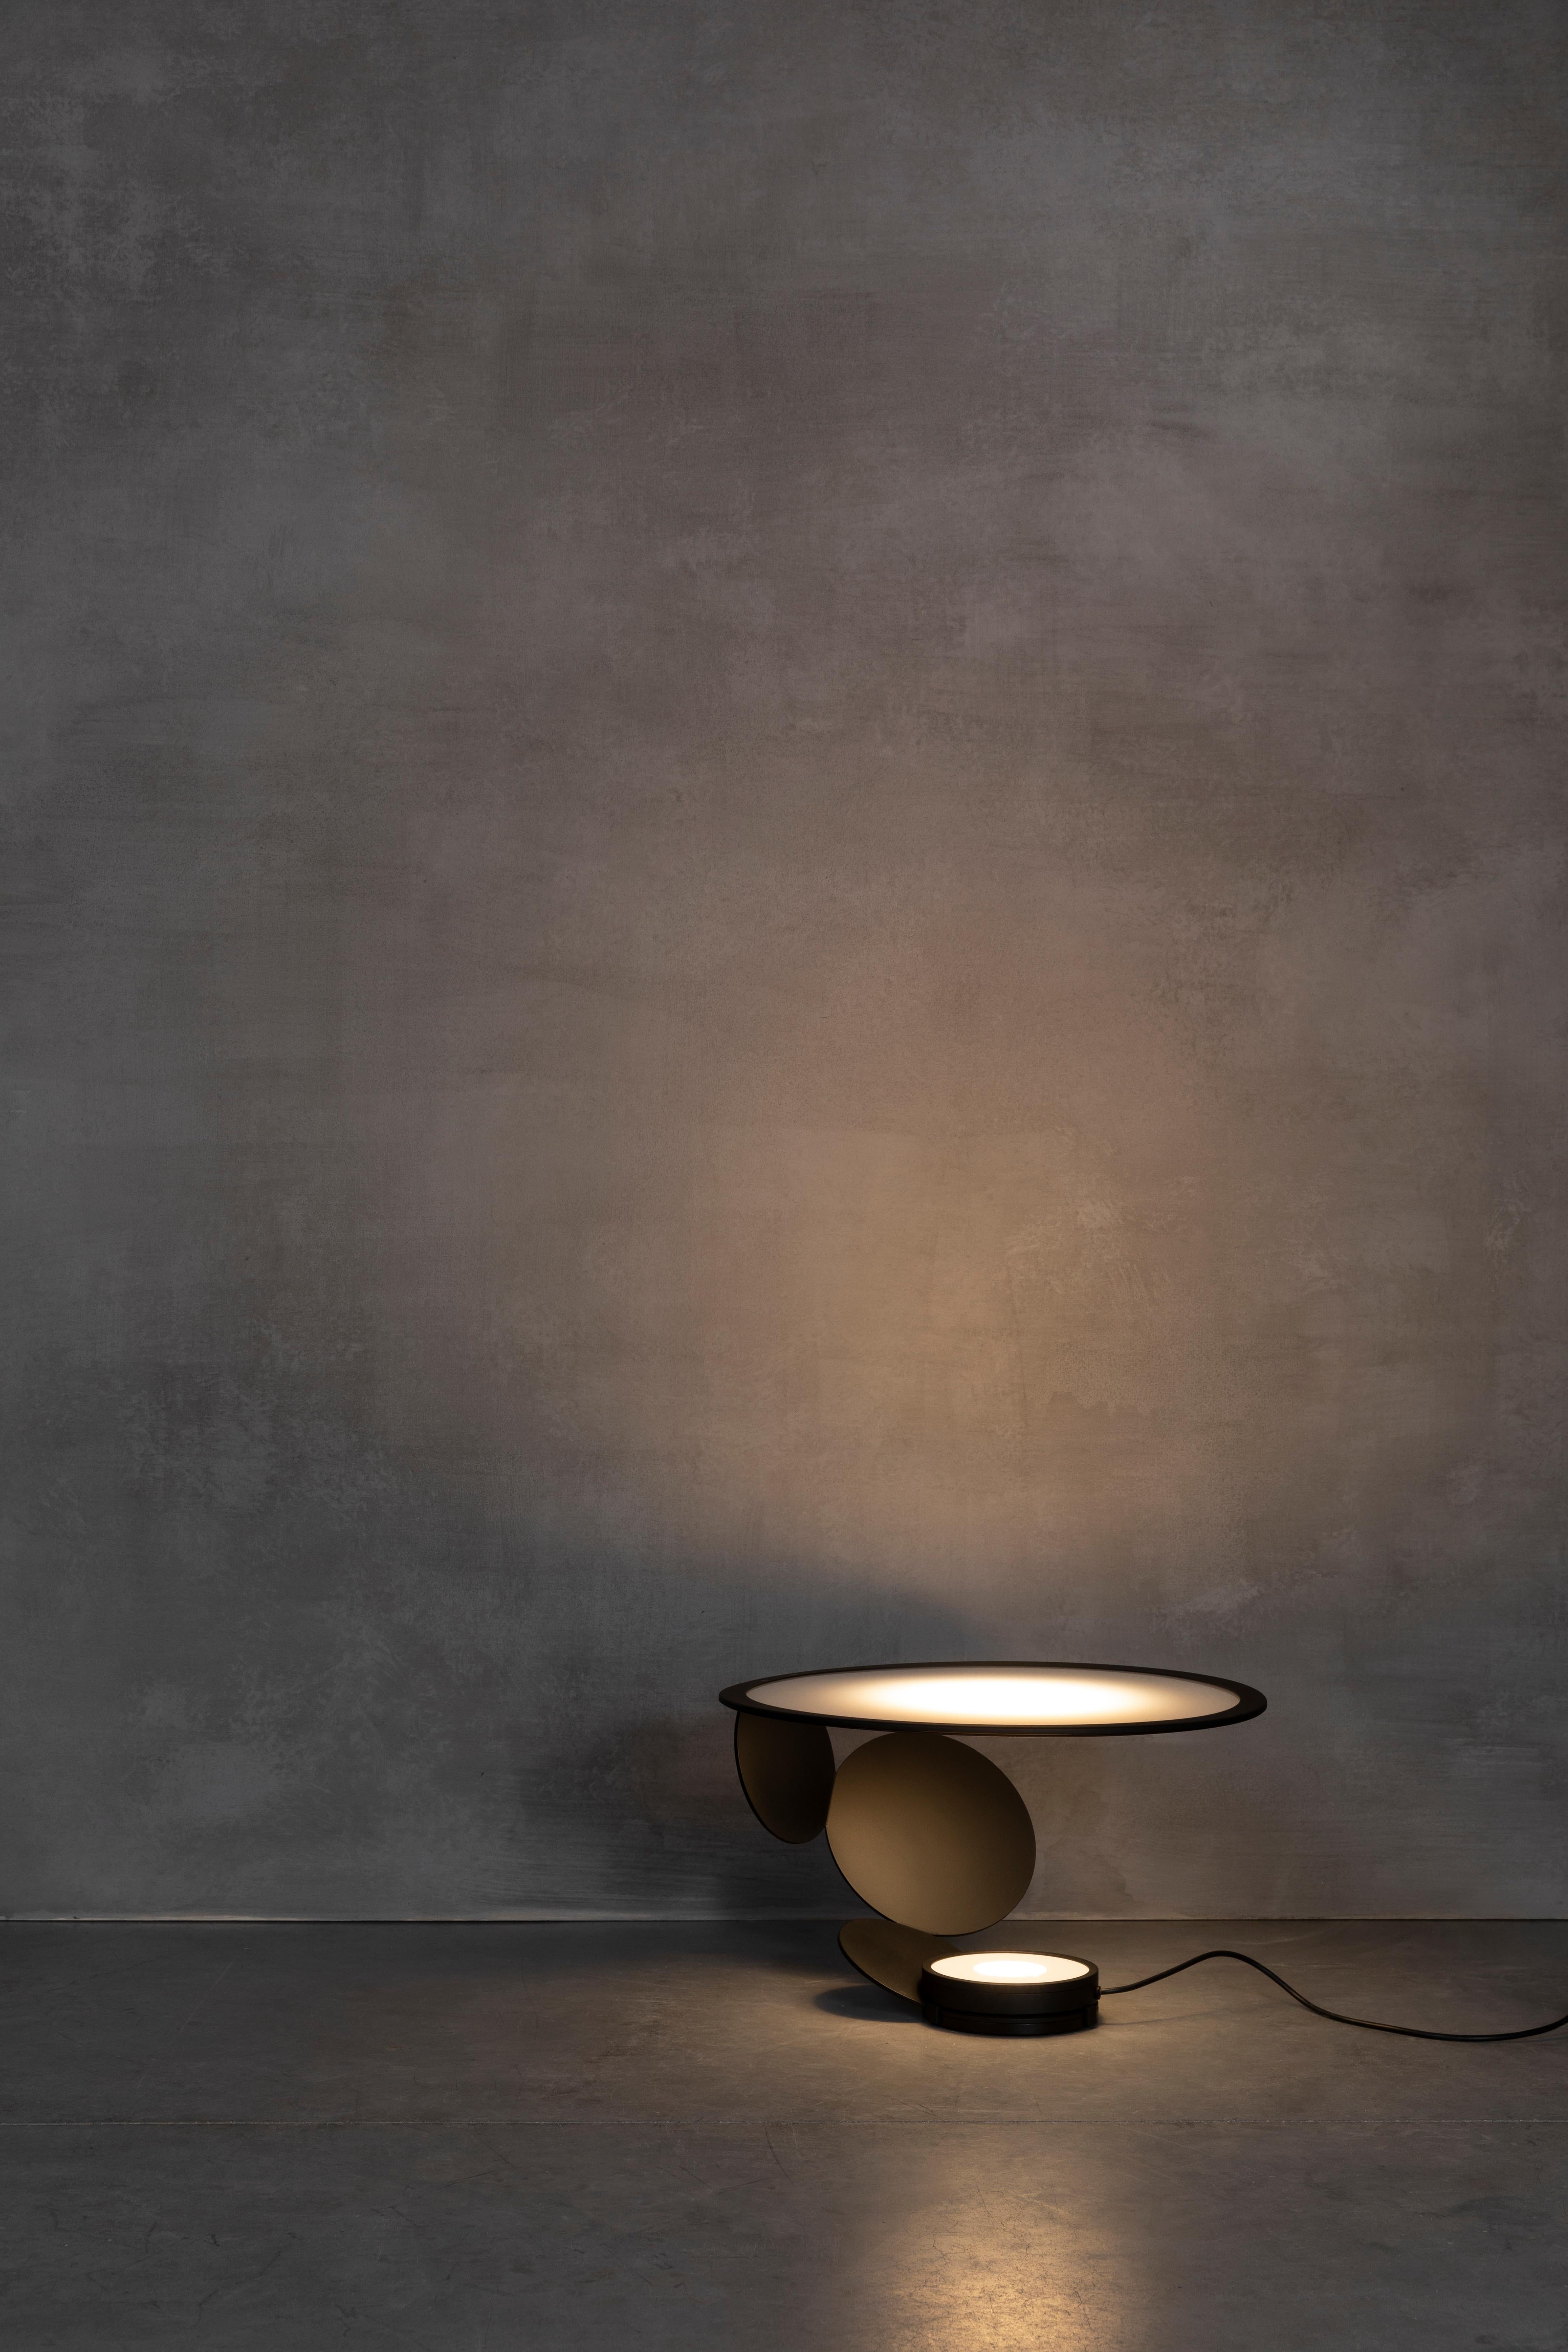 Axolight Cut Medium Table Lamp in Intense Black by Timo Ripatti

Softness of the atmosphere and personalization of orientation. Cut expresses a refined design and an emotional light which does not dazzle, but wraps gently.

Cut is the result of a